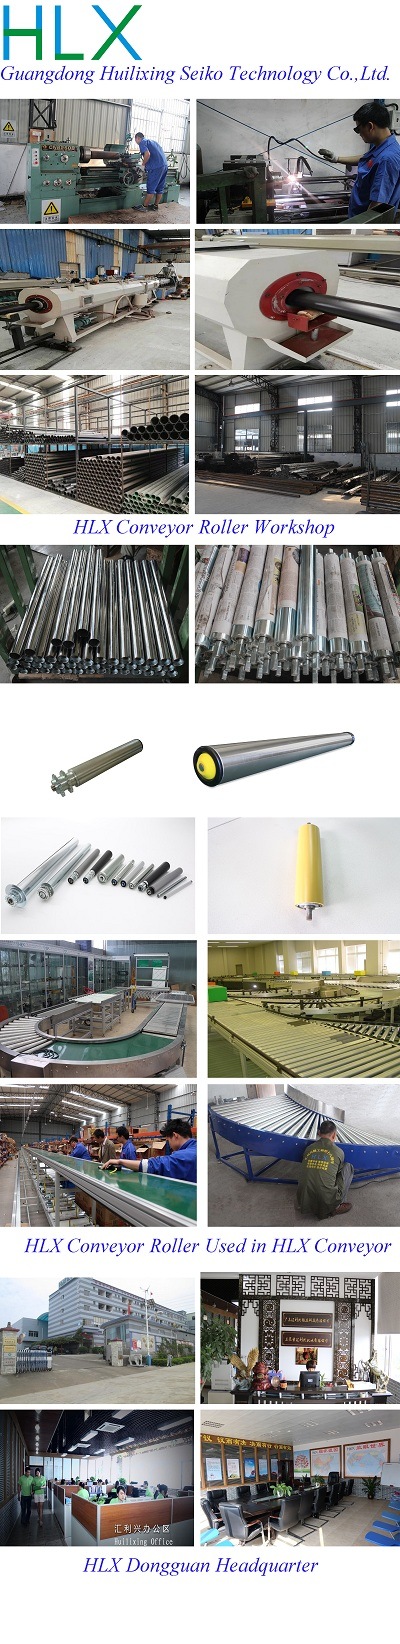 Stainless Steel Sprockets Conveyor Roller in Hlx Group